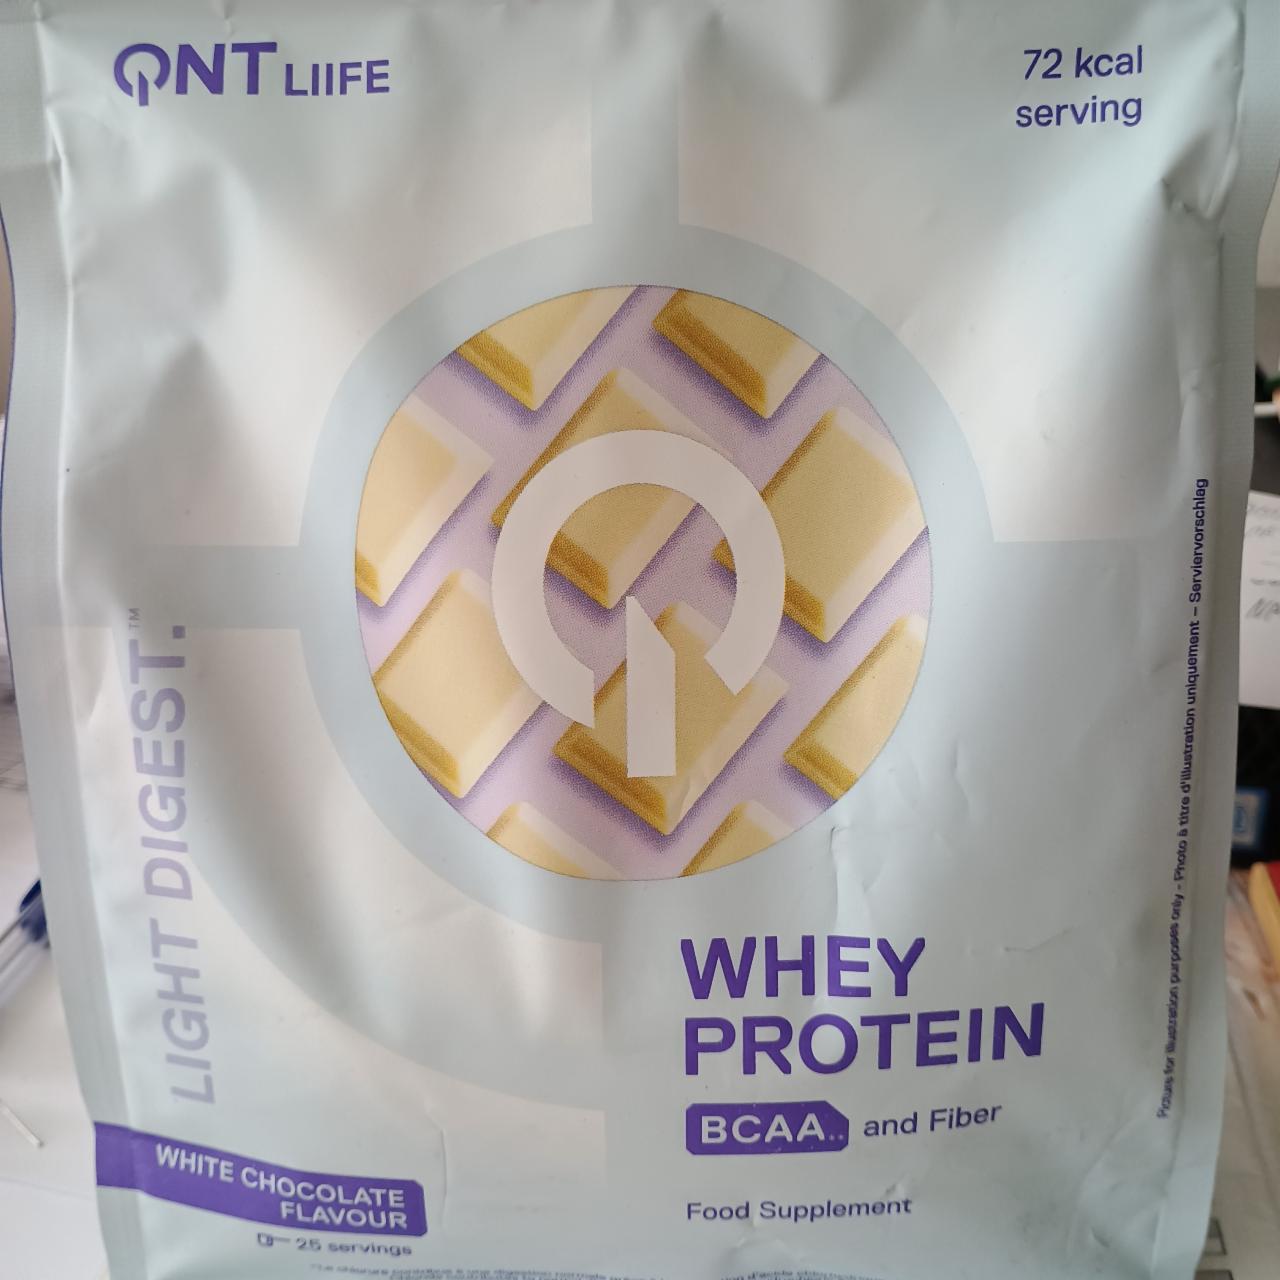 Fotografie - Whey protein BCAA white chocolate flavour light digest QNT liife